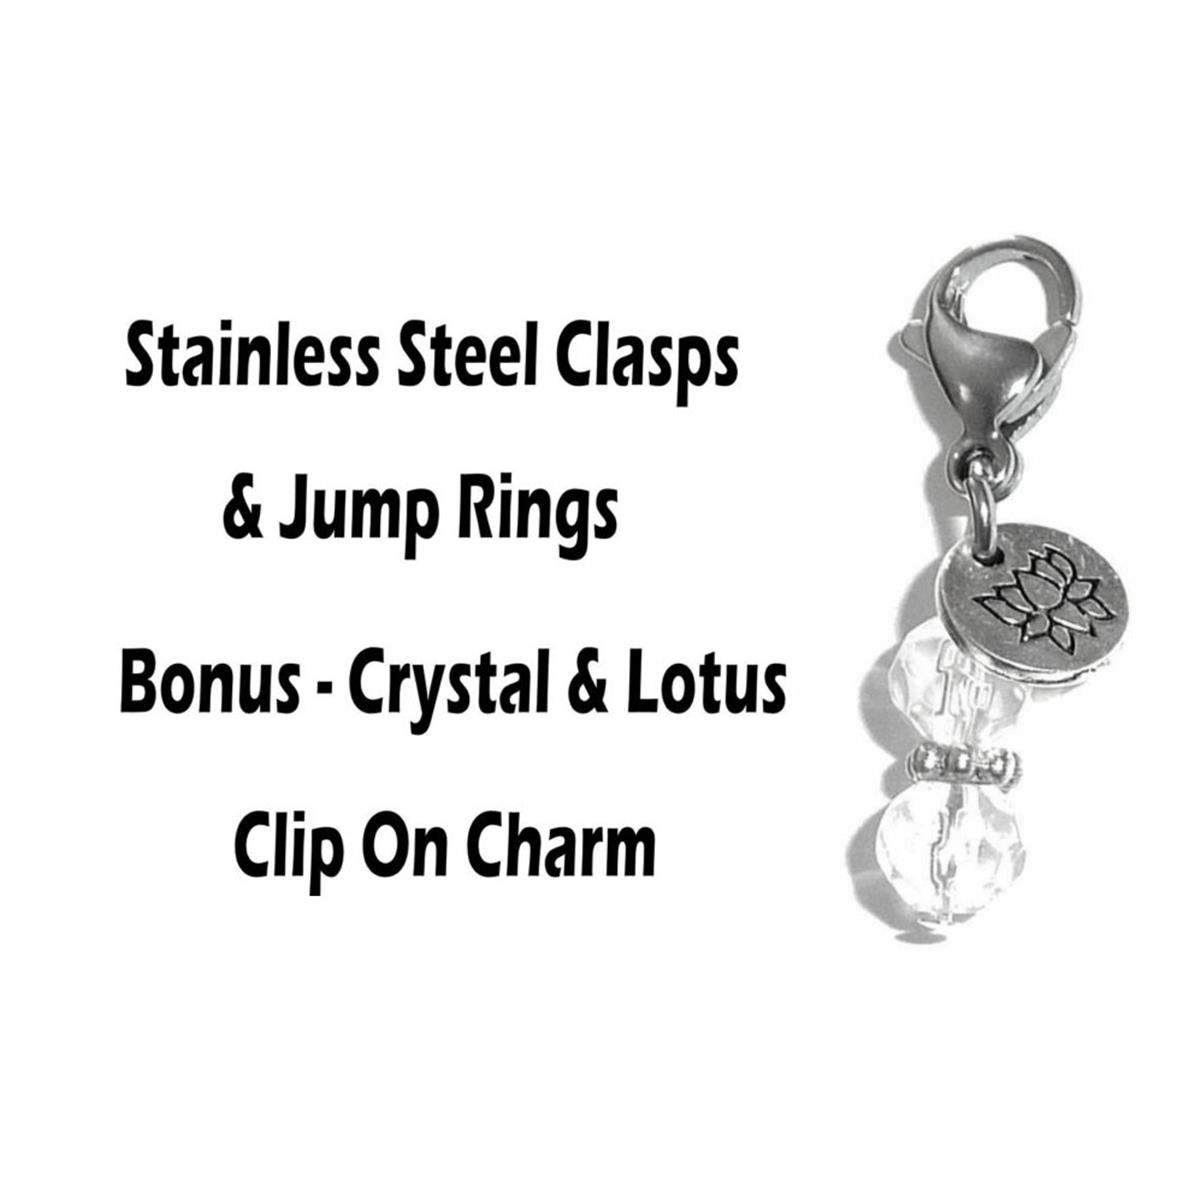 4 Pack Dance Clip On Charms - Whimsical Charms Clip On Anywhere